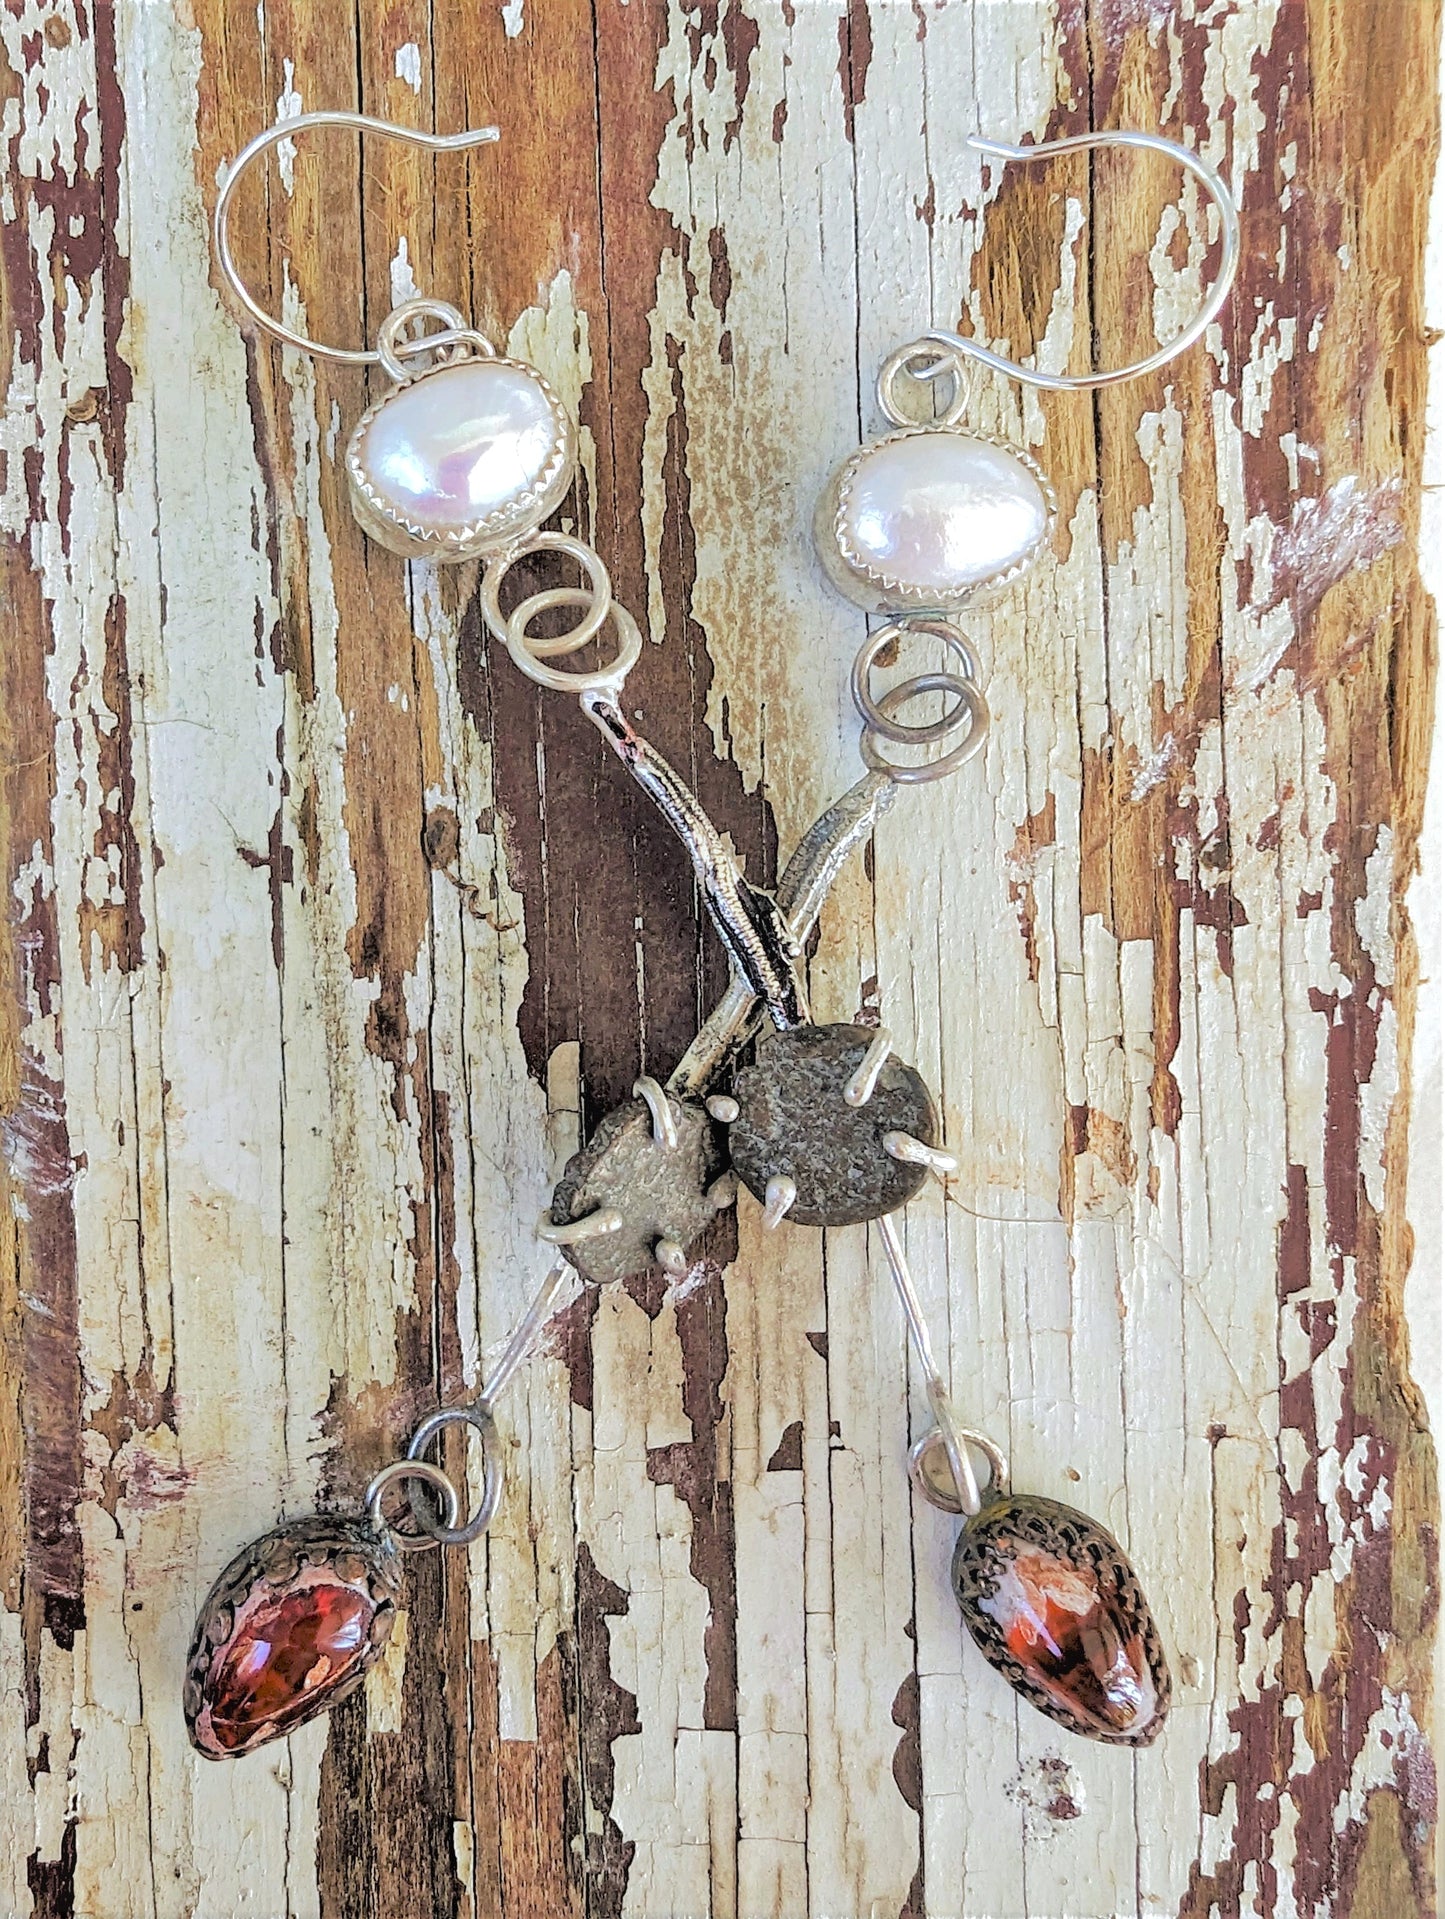 Bohemian Rustic Fused Silver, Roman Coin, Pearl and Mexican Fire Opal Dangle Earrings